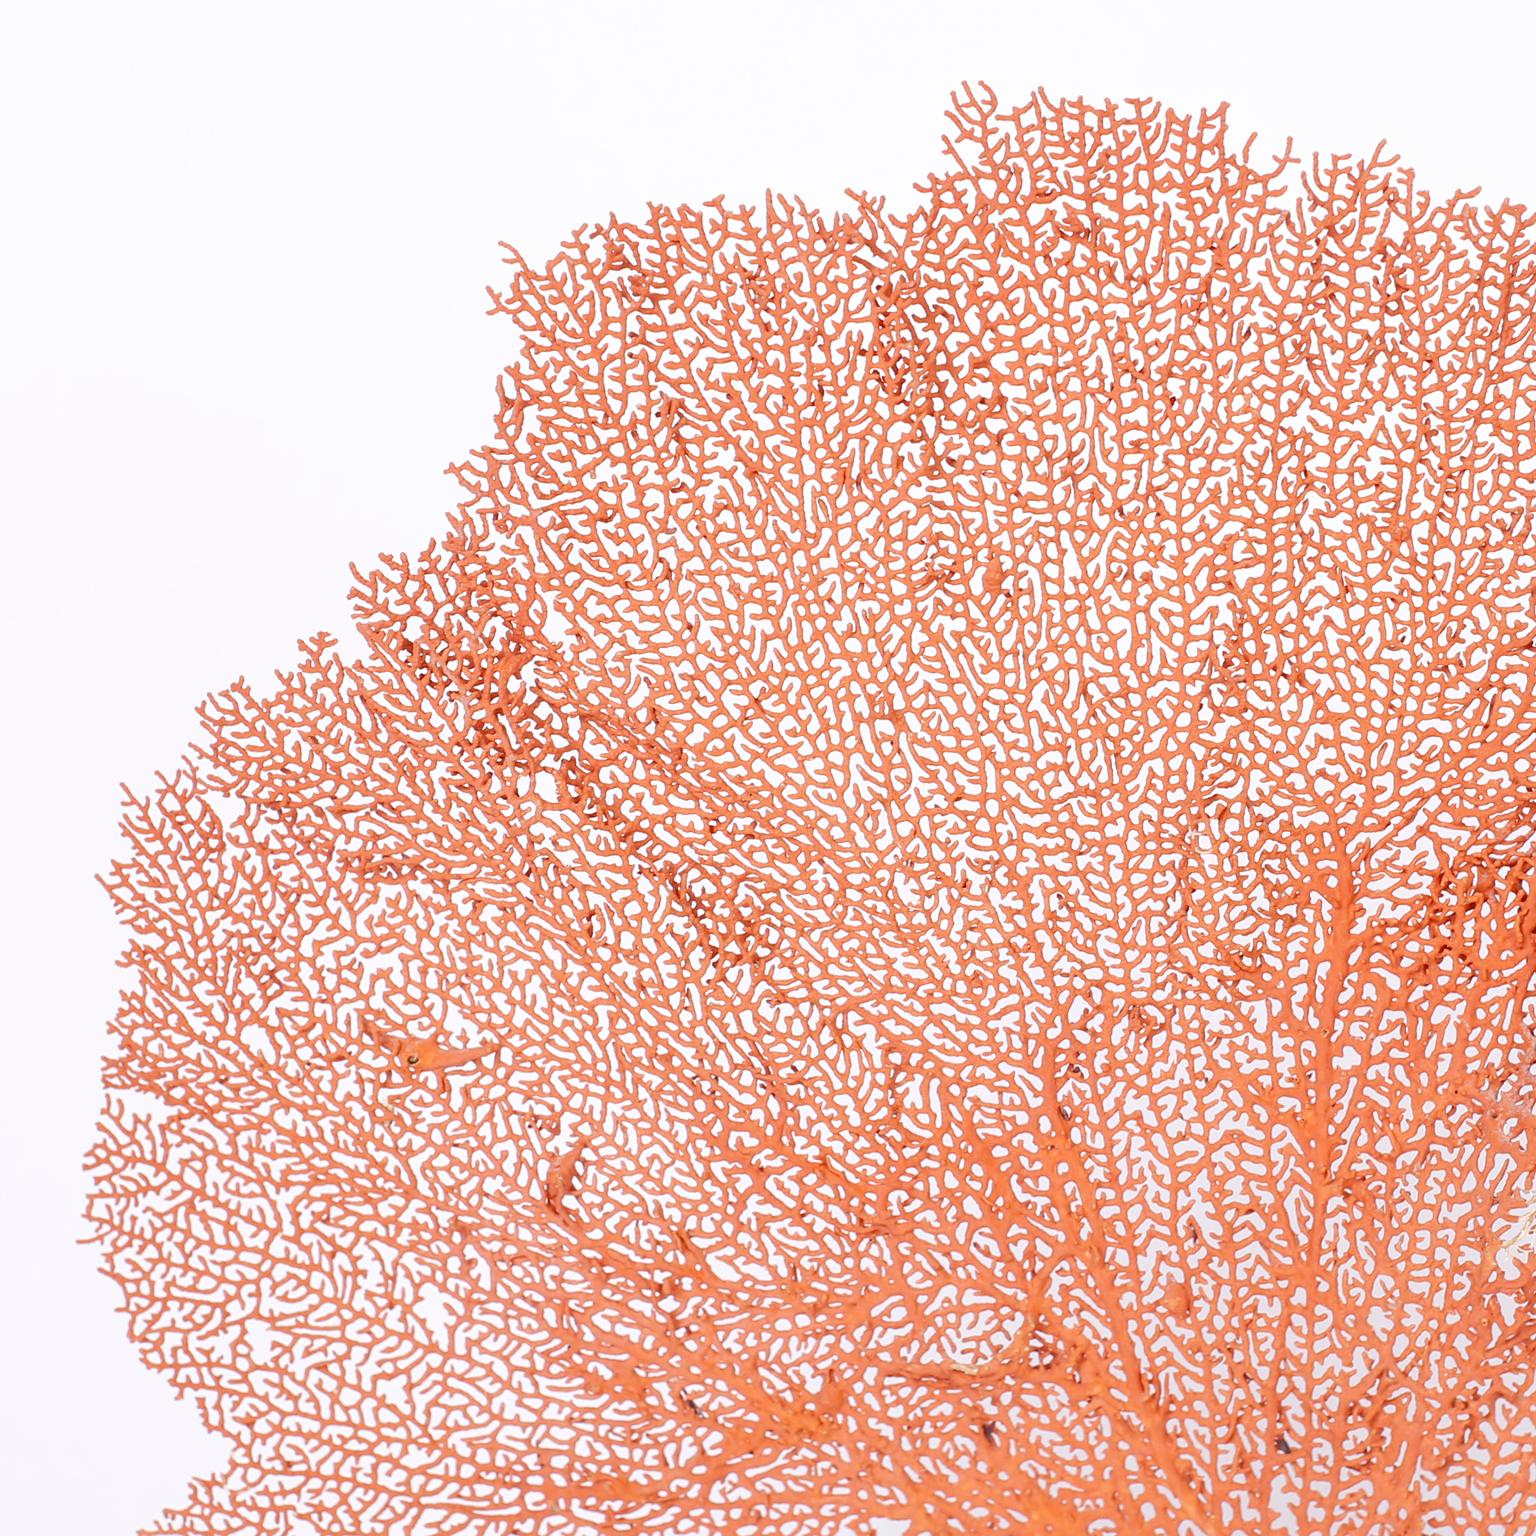 Authentic red sea fan specimen with its glorious form and vibrant tropical color, presented on a Lucite base.